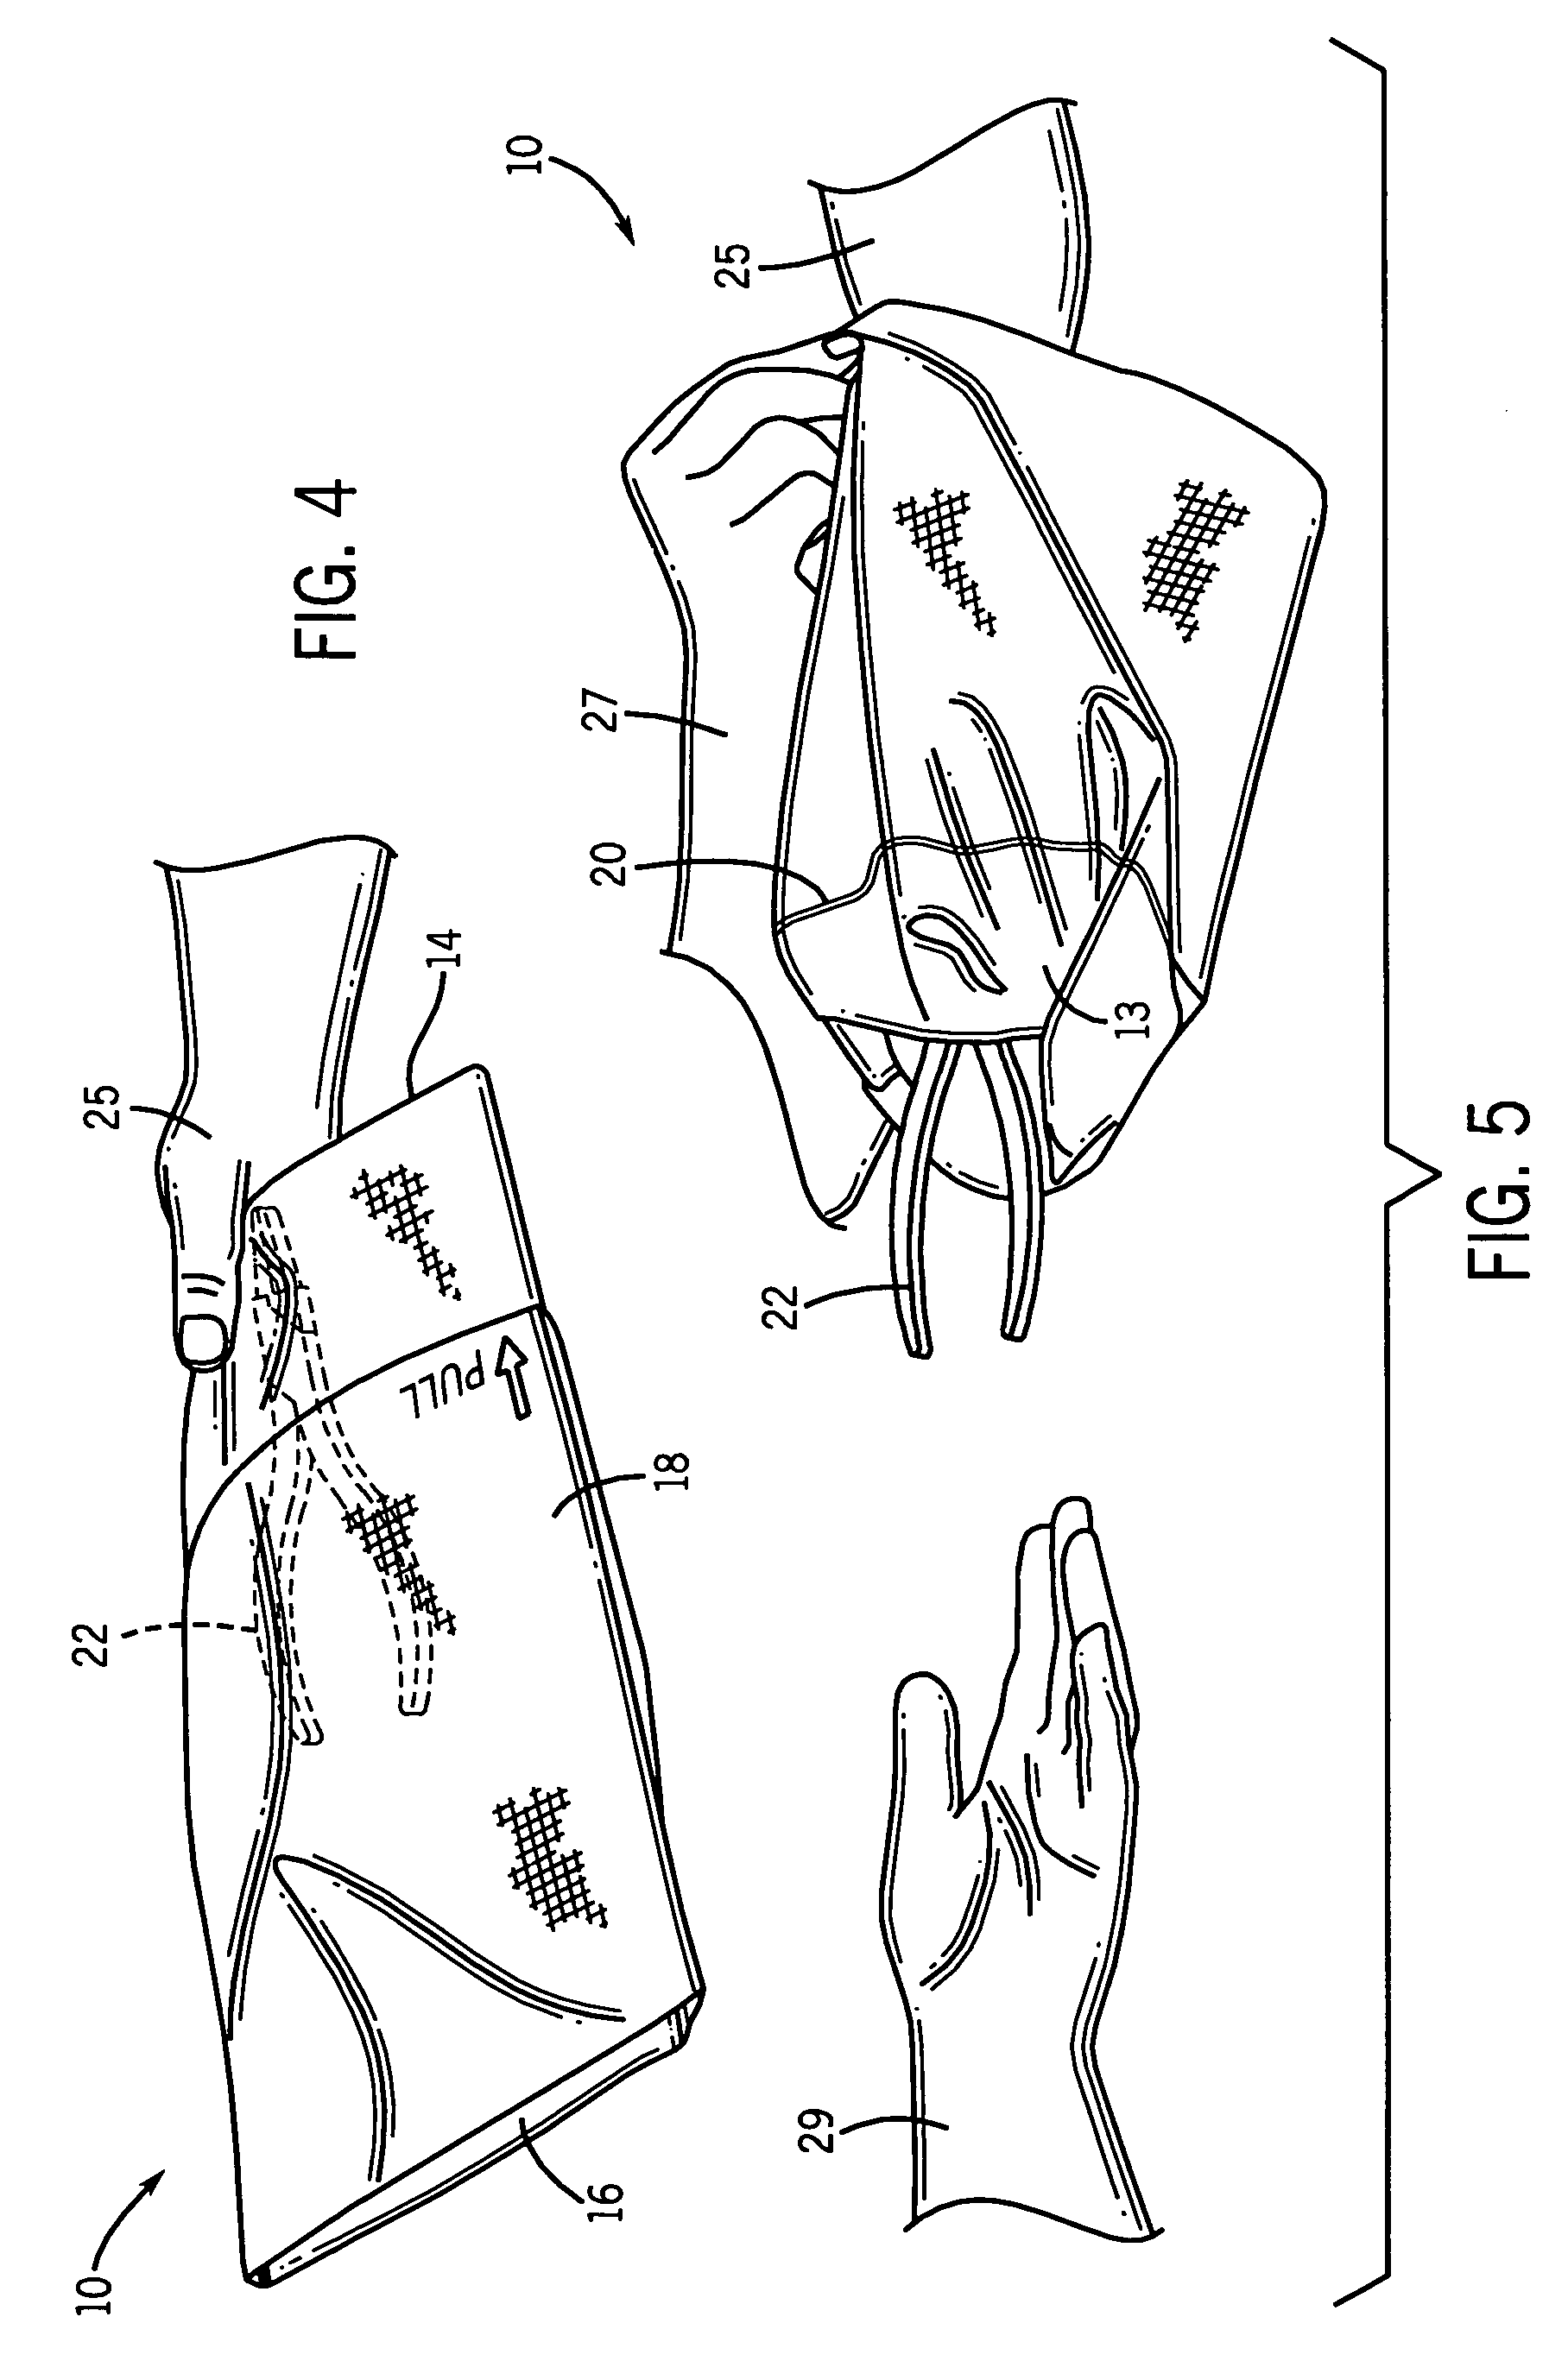 Packaging system for a sterilized article